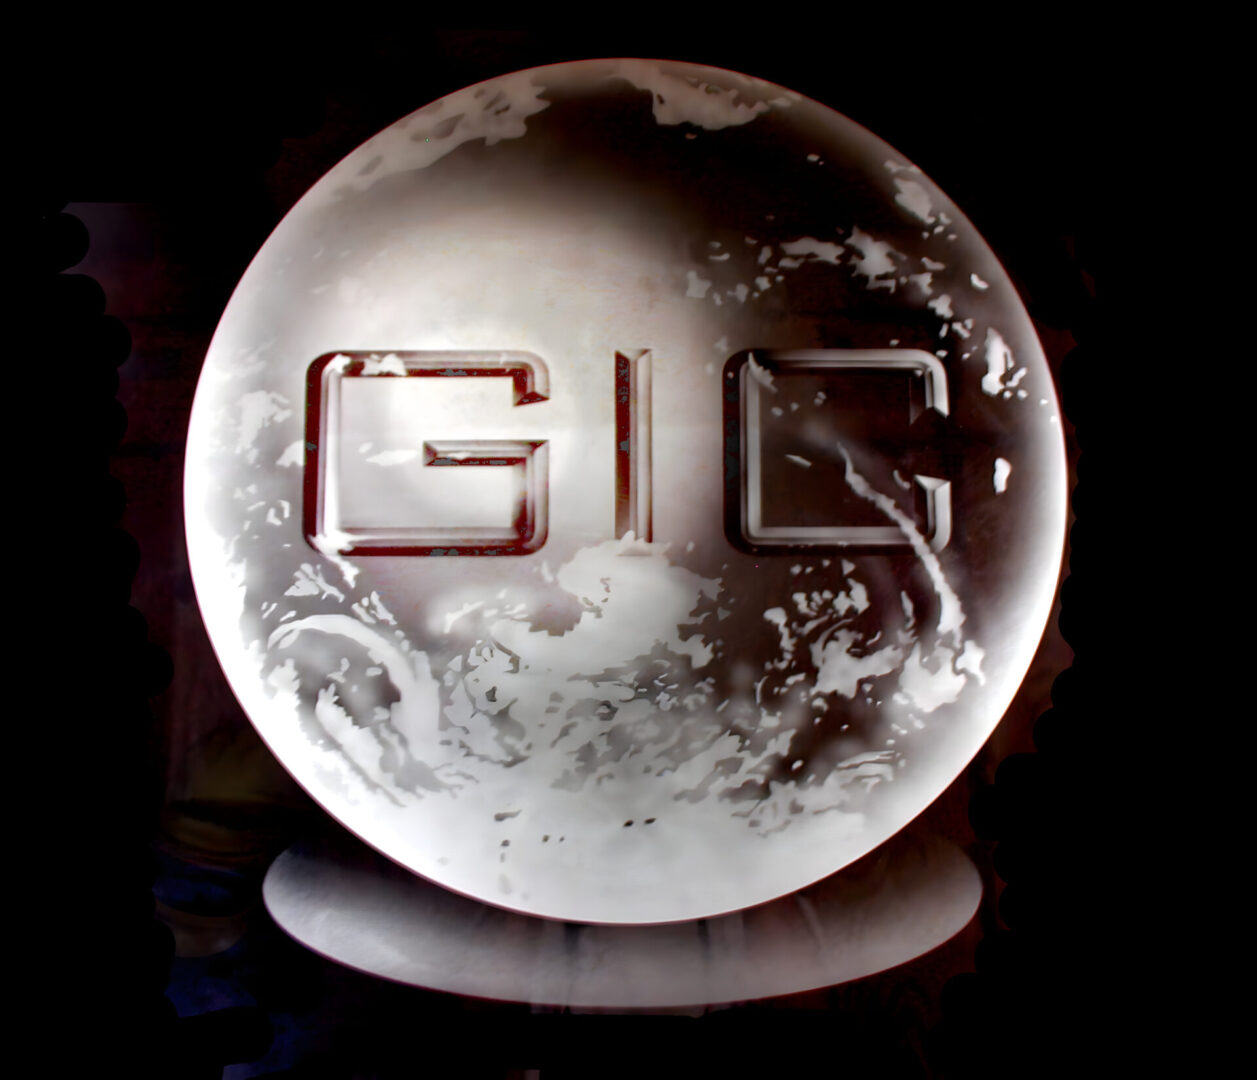 A metallic circular object with the letters "gic" embossed in the center, highlighted against a dark background.